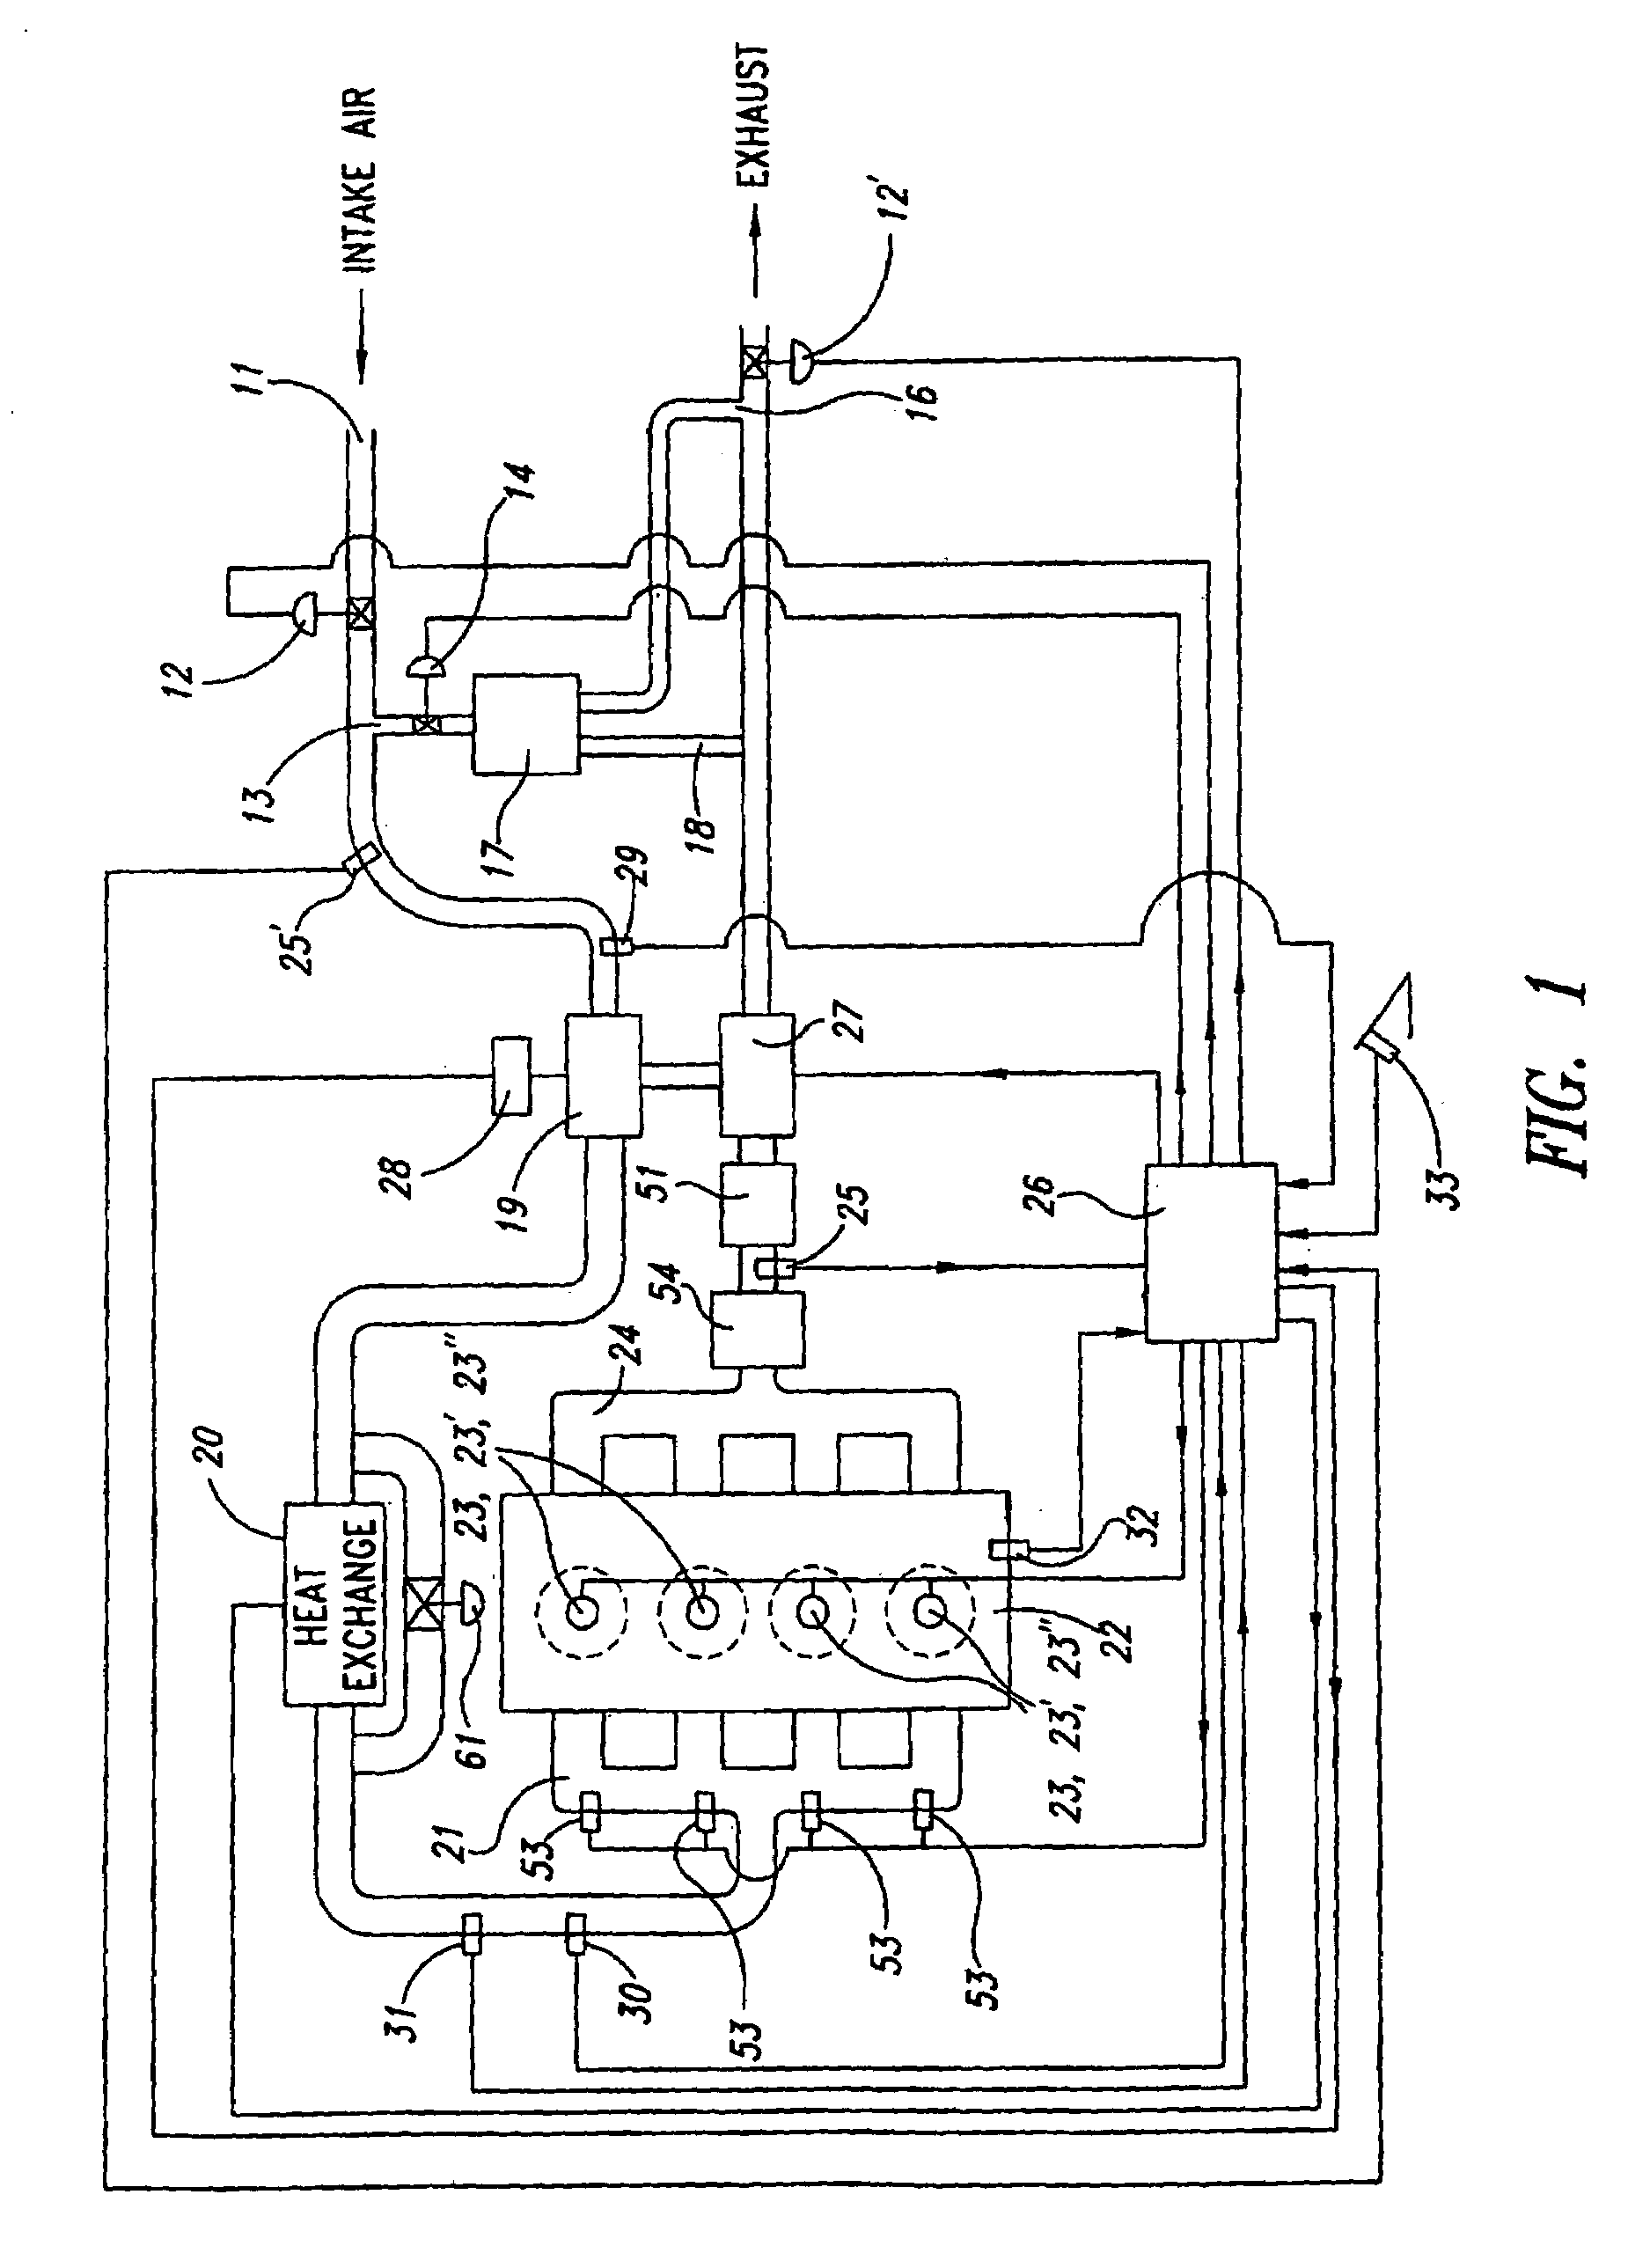 Methods for low emission, controlled temperature combustion in engines which utilize late direct cylinder injection of fuel